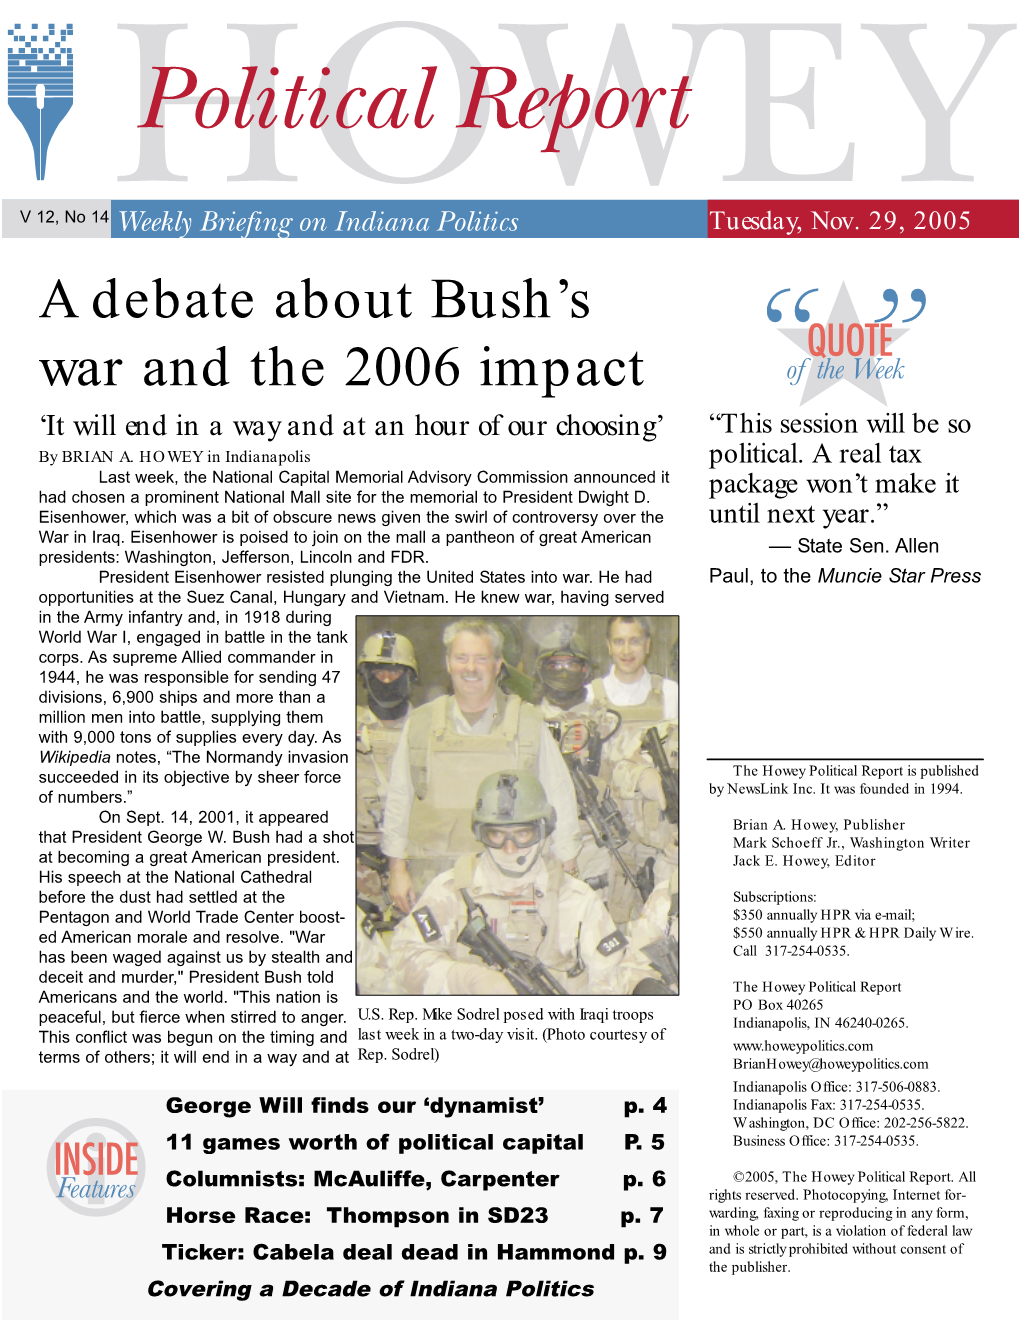 A Debate About Bush's War and the 2006 Impact